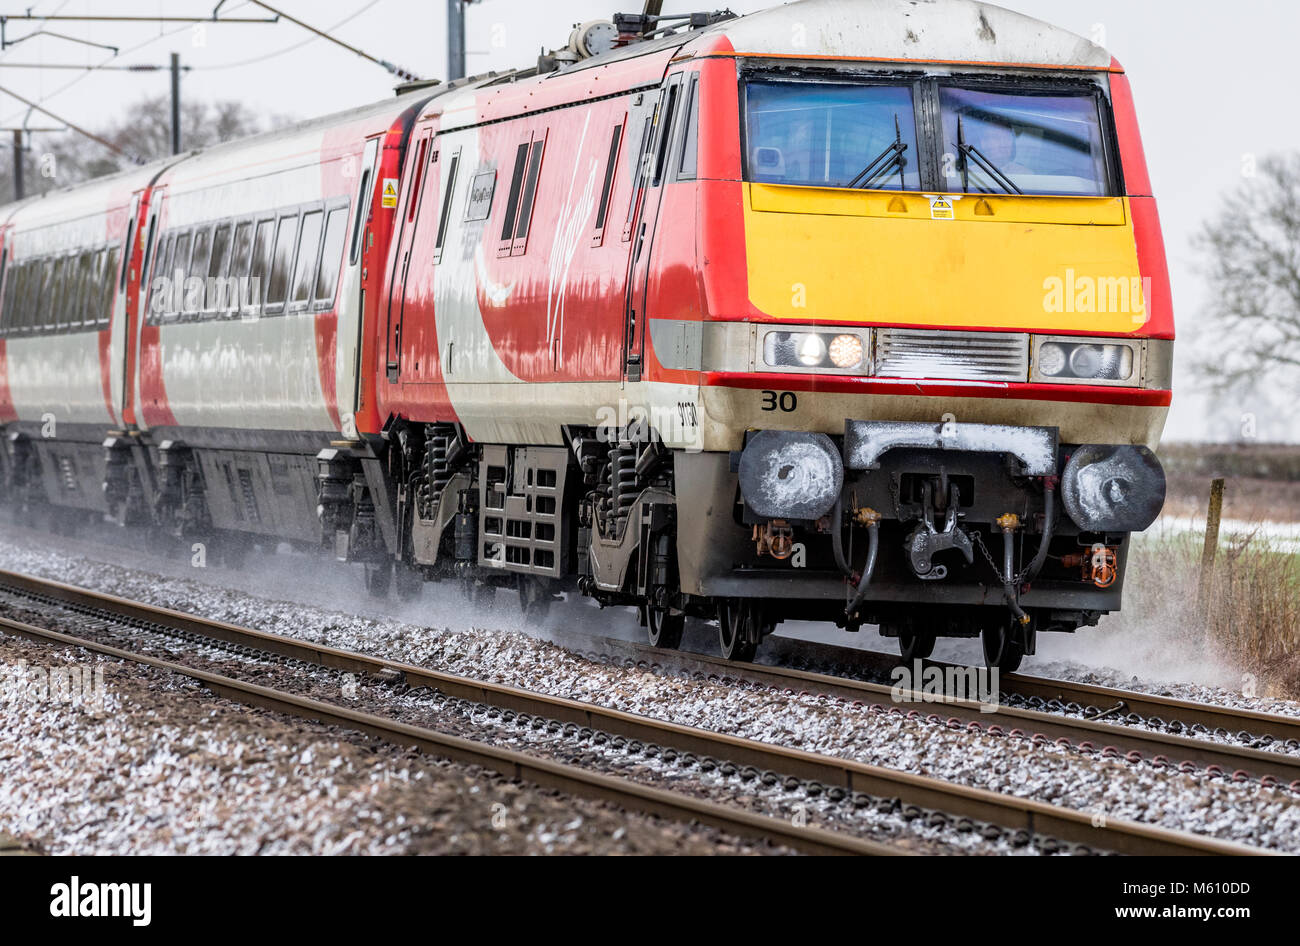 Retford, Nottinghamshire, UK. 27th February, 2018. UK, Weather, Snow showers affecting train travel and disruption on the East Coast Mainline, as the Beast from the East hits the UK. Retford, Nottinghamshire, UK. Alan Beastall/Alamy Live News. Stock Photo